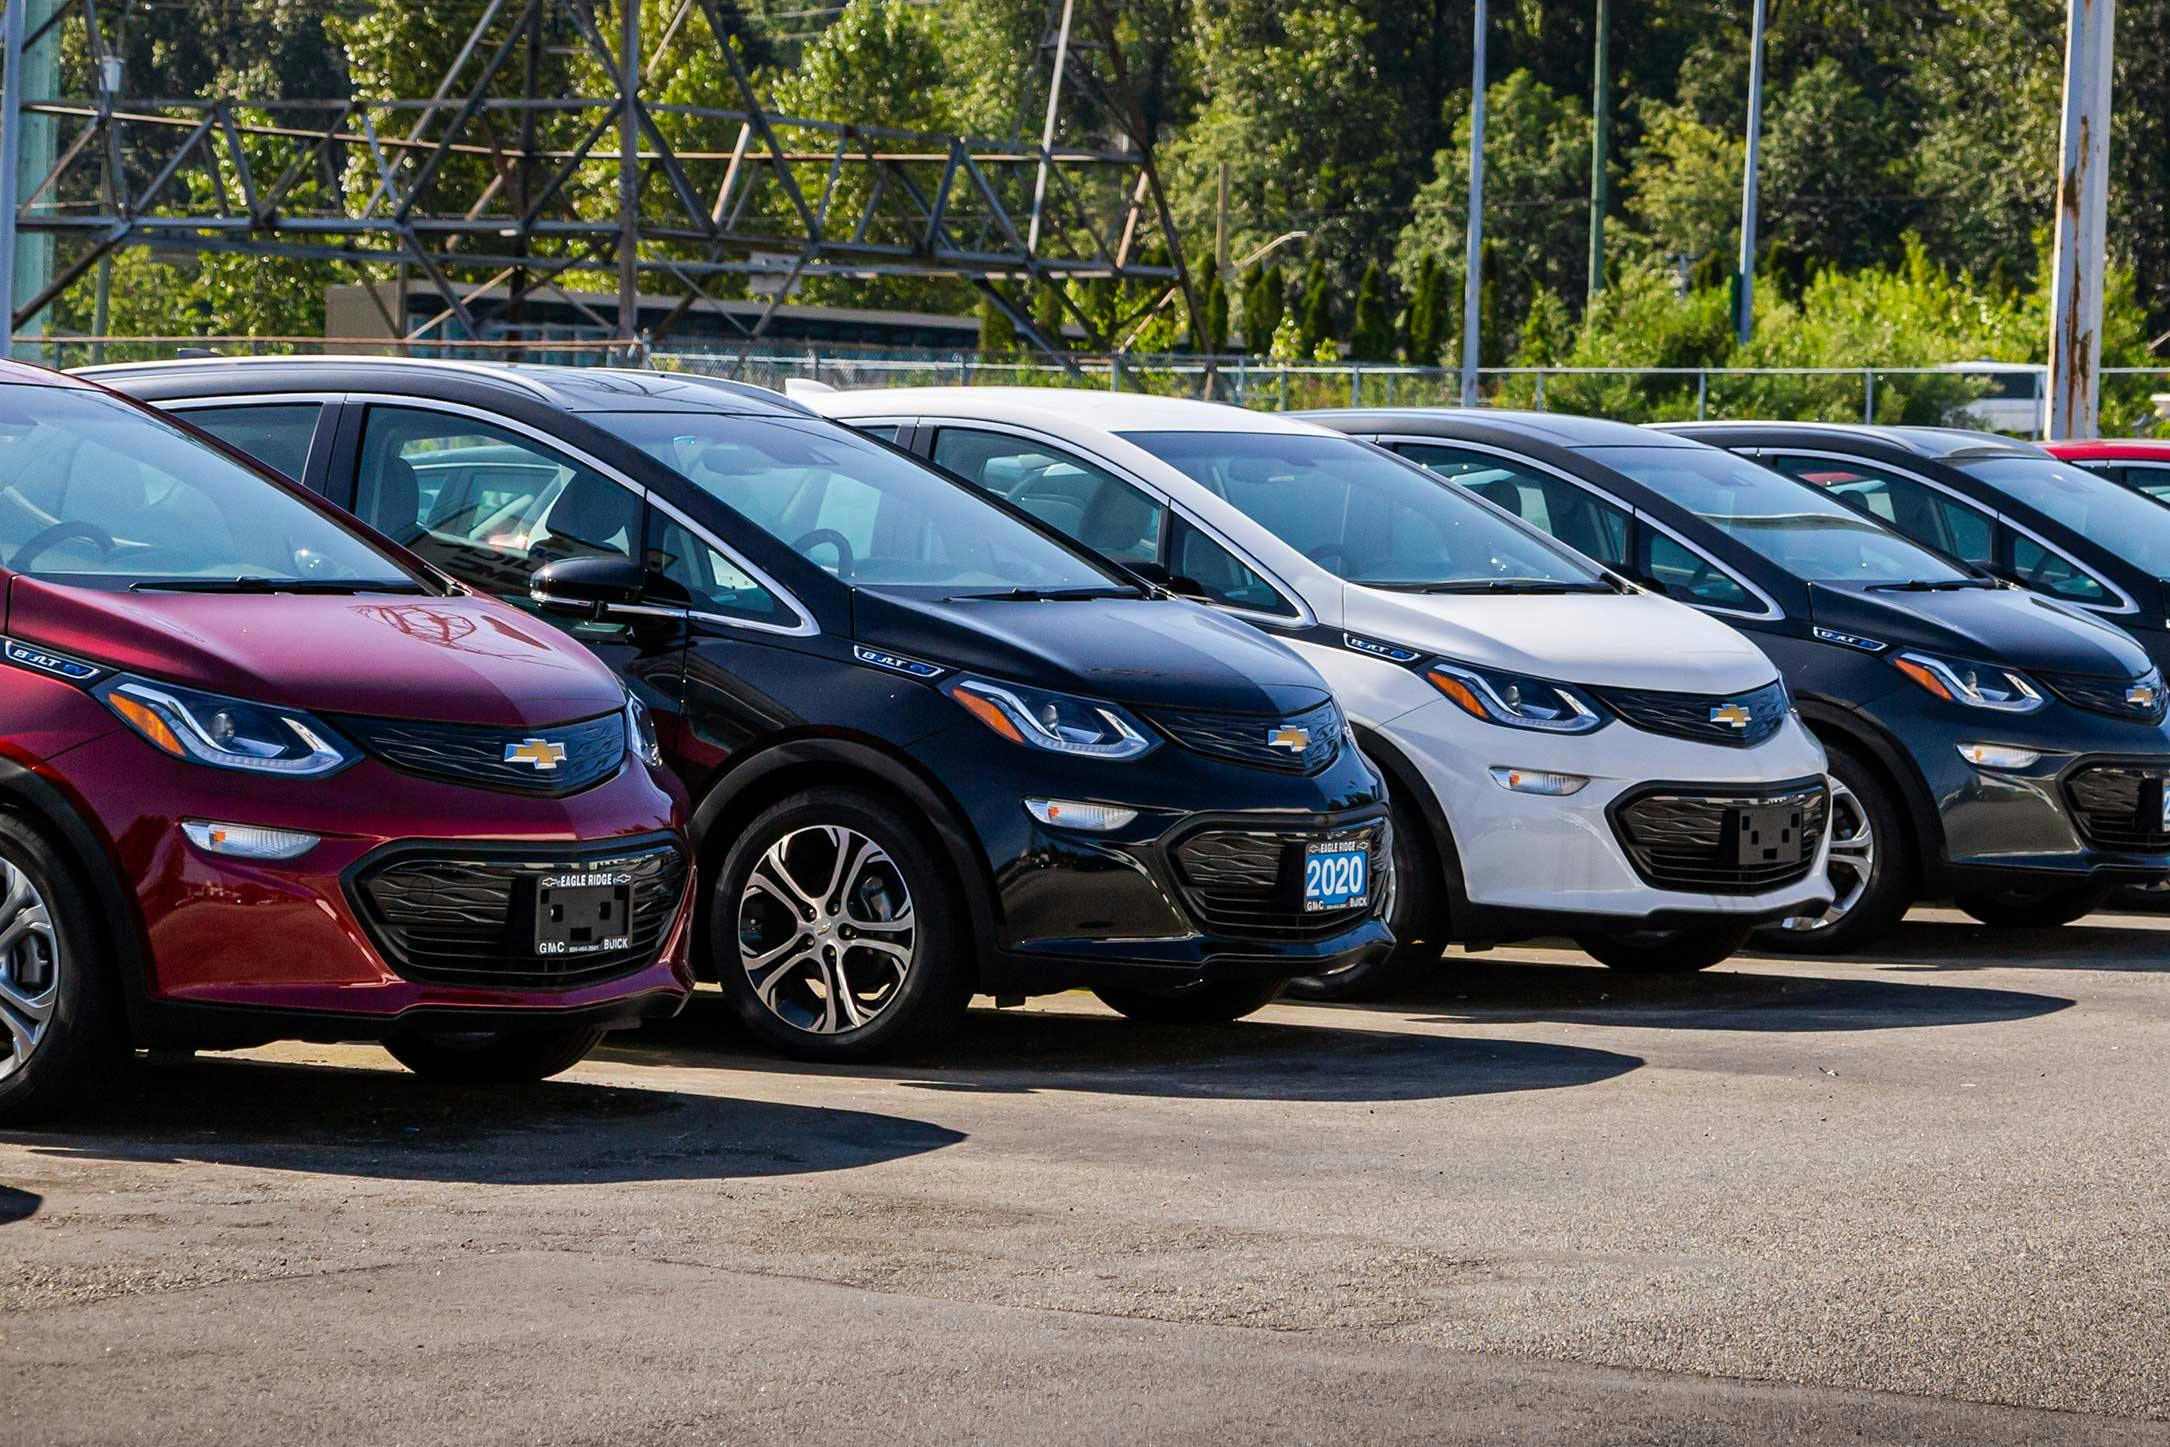 Buying an EV will be cheaper next year